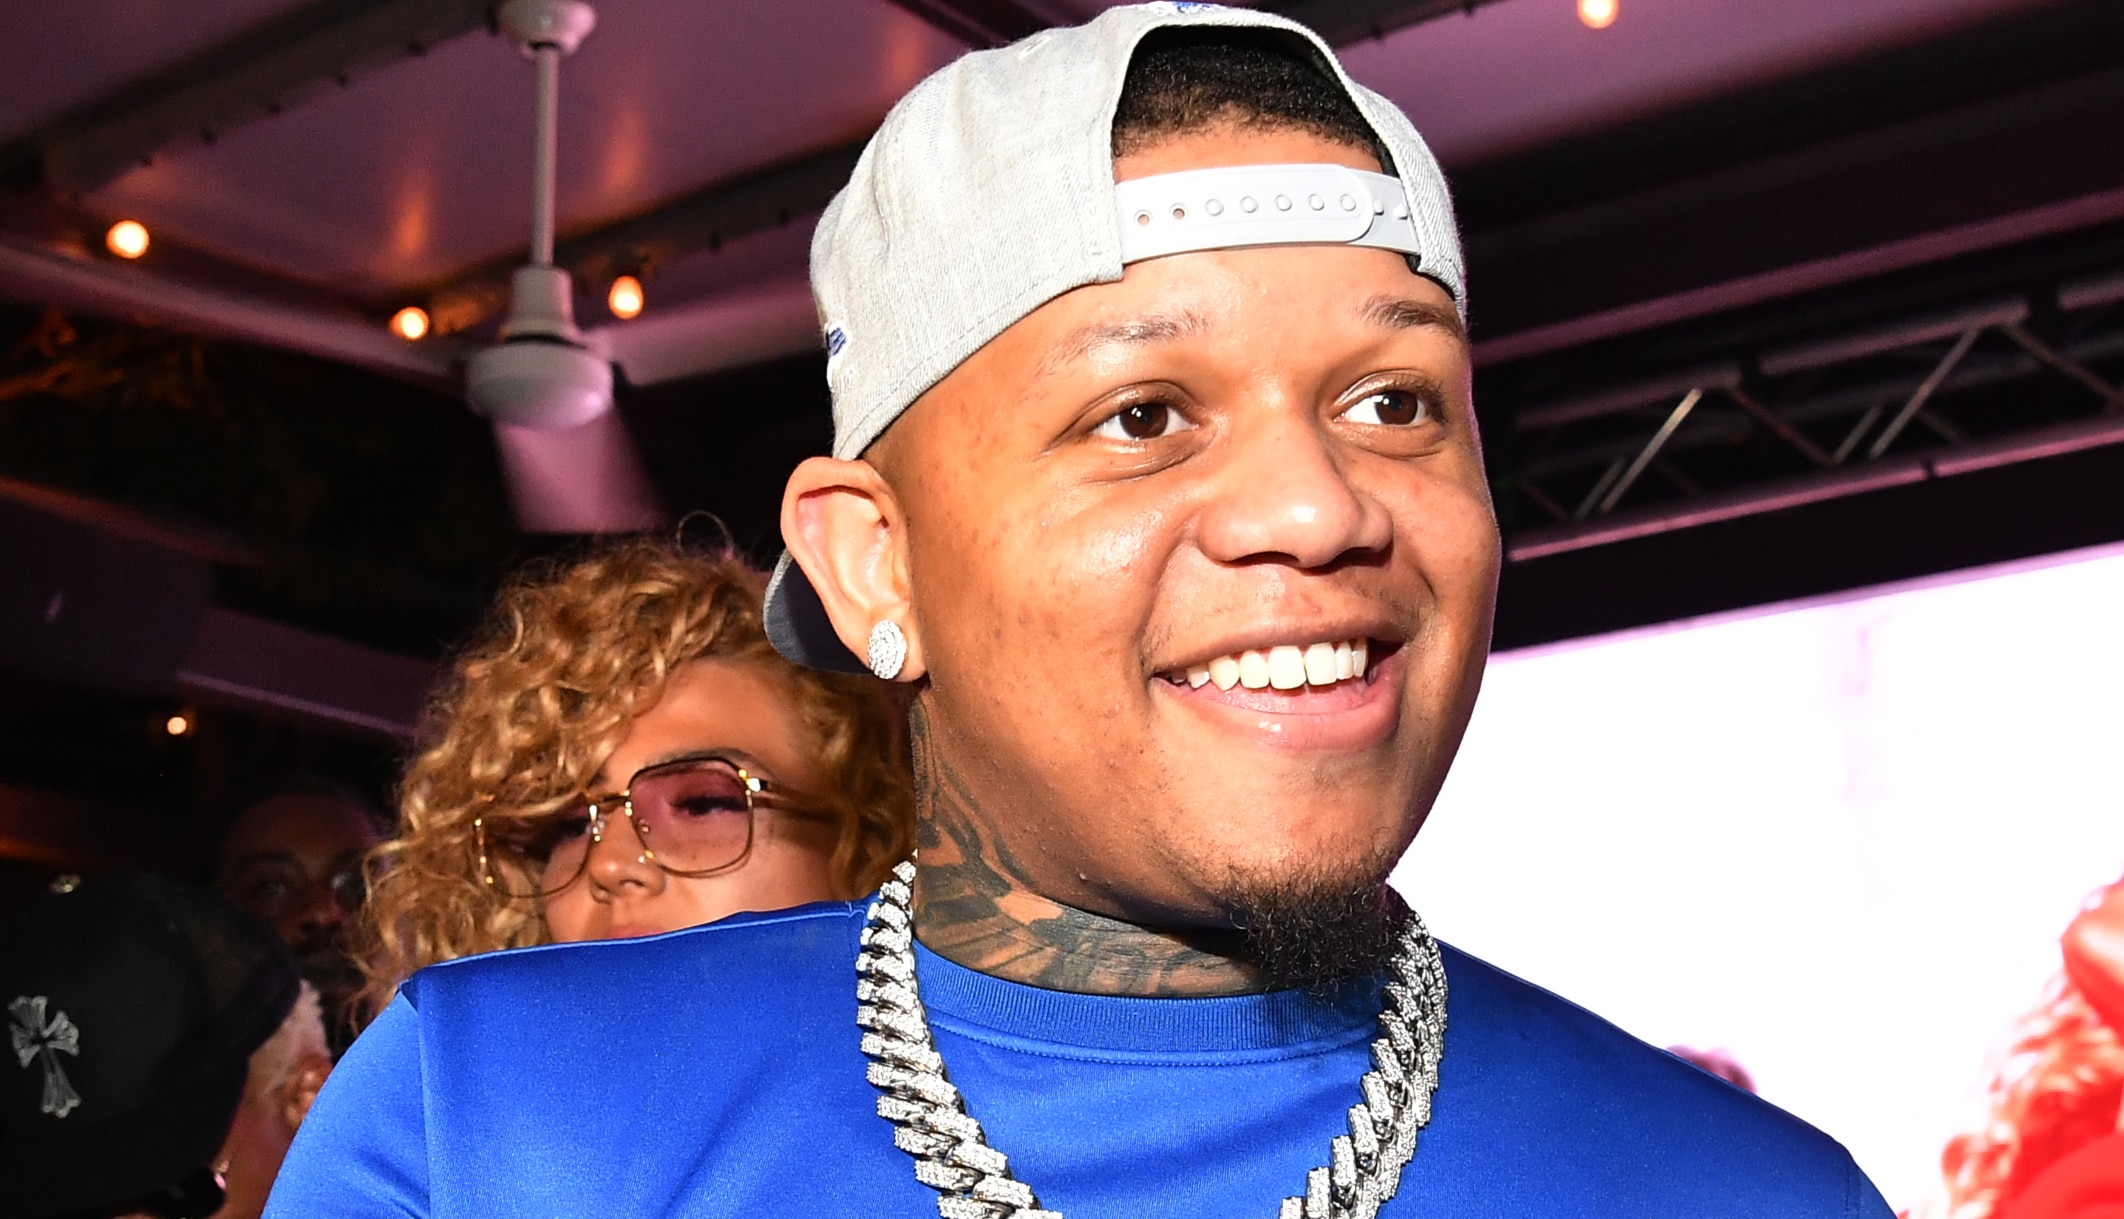 Texas rapper Yella Beezy was hospitalized over the weekend after being shot...